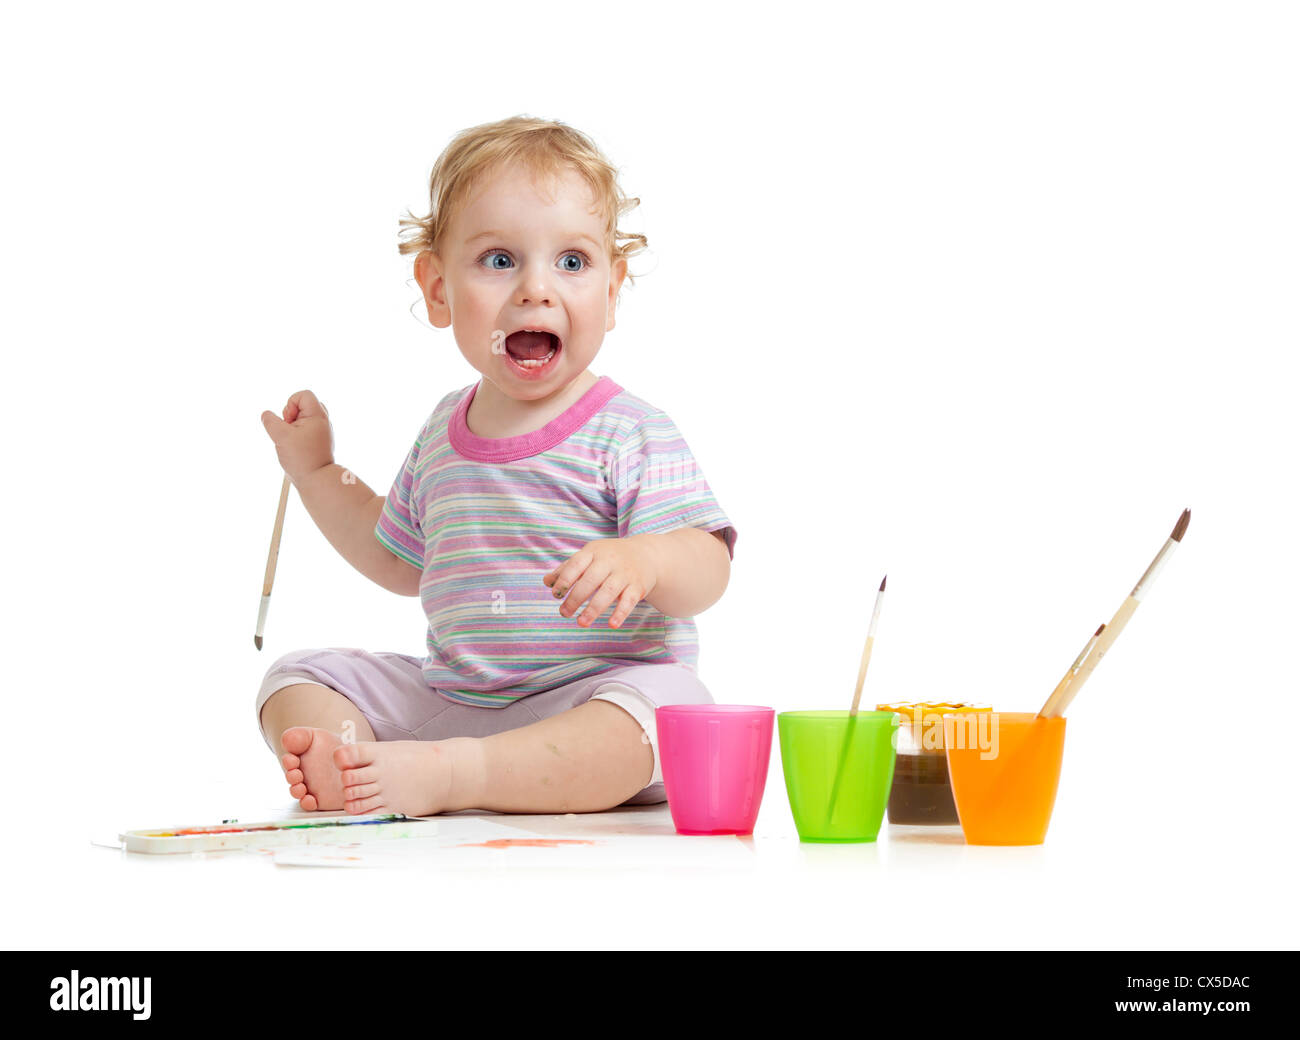 Funny kid with open mouth painting with brush Stock Photo